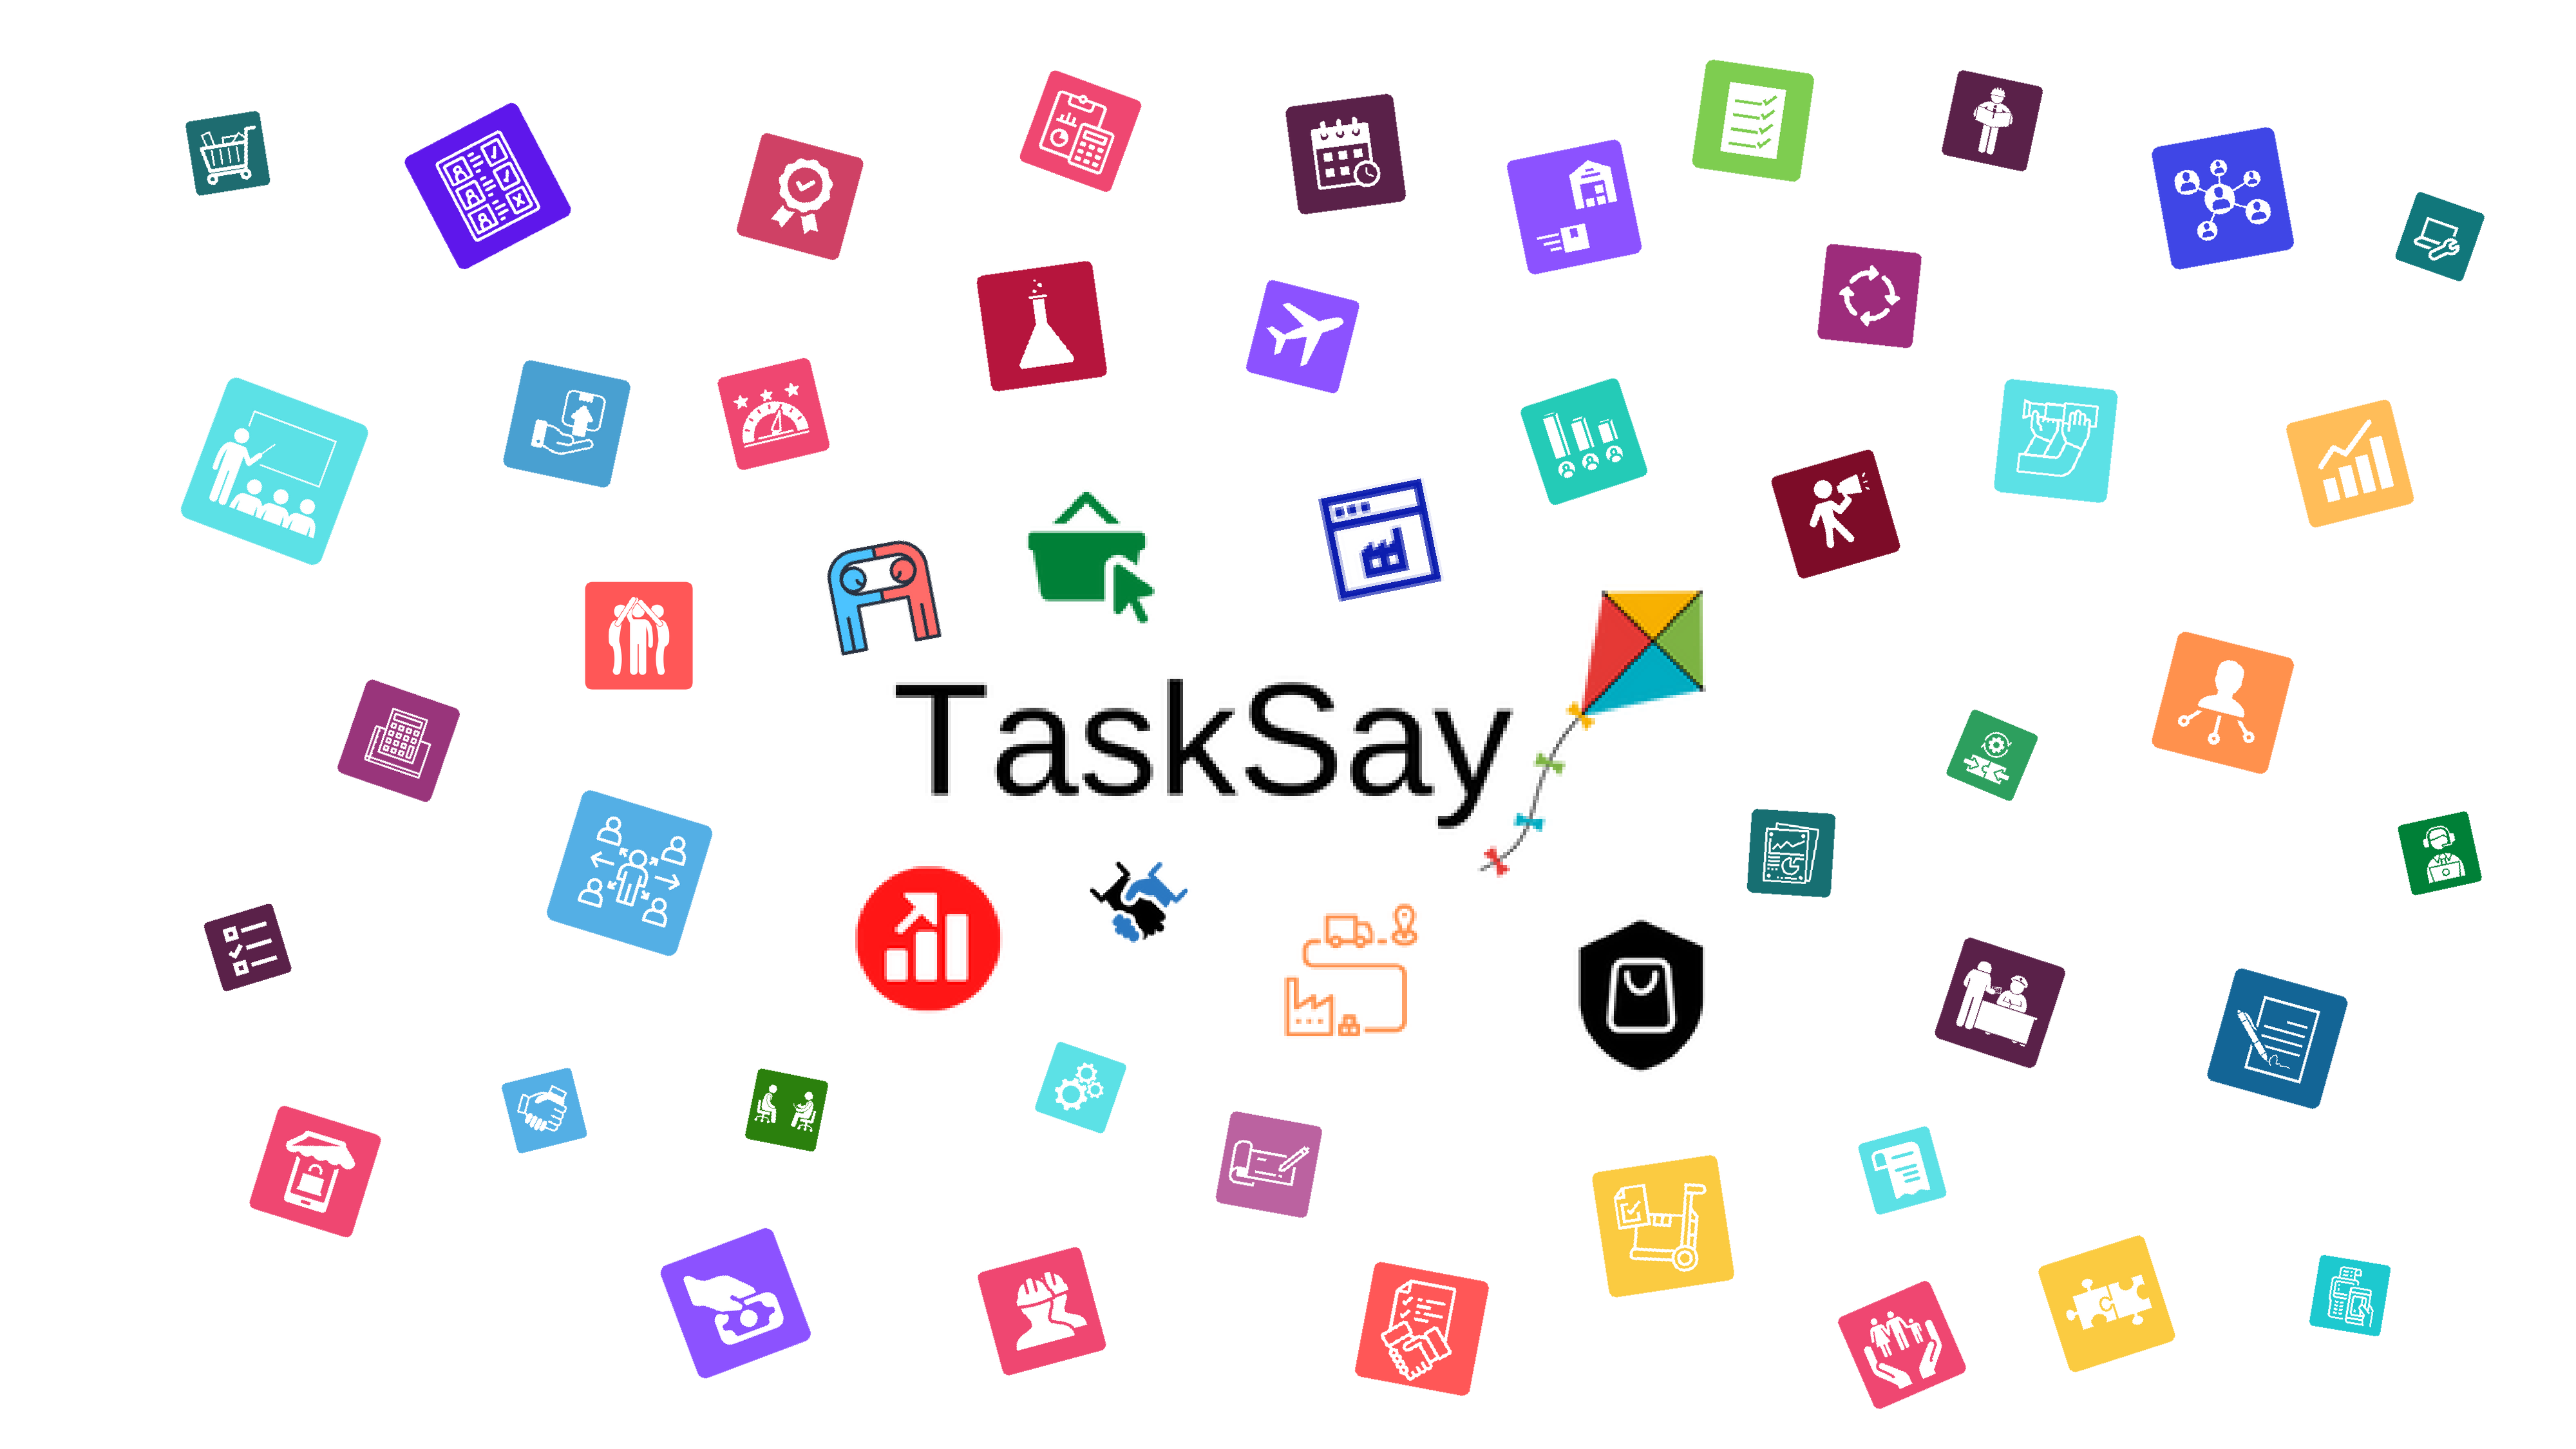 Tasksay: Best, Simple, Reliable and Rewarding ERP Software